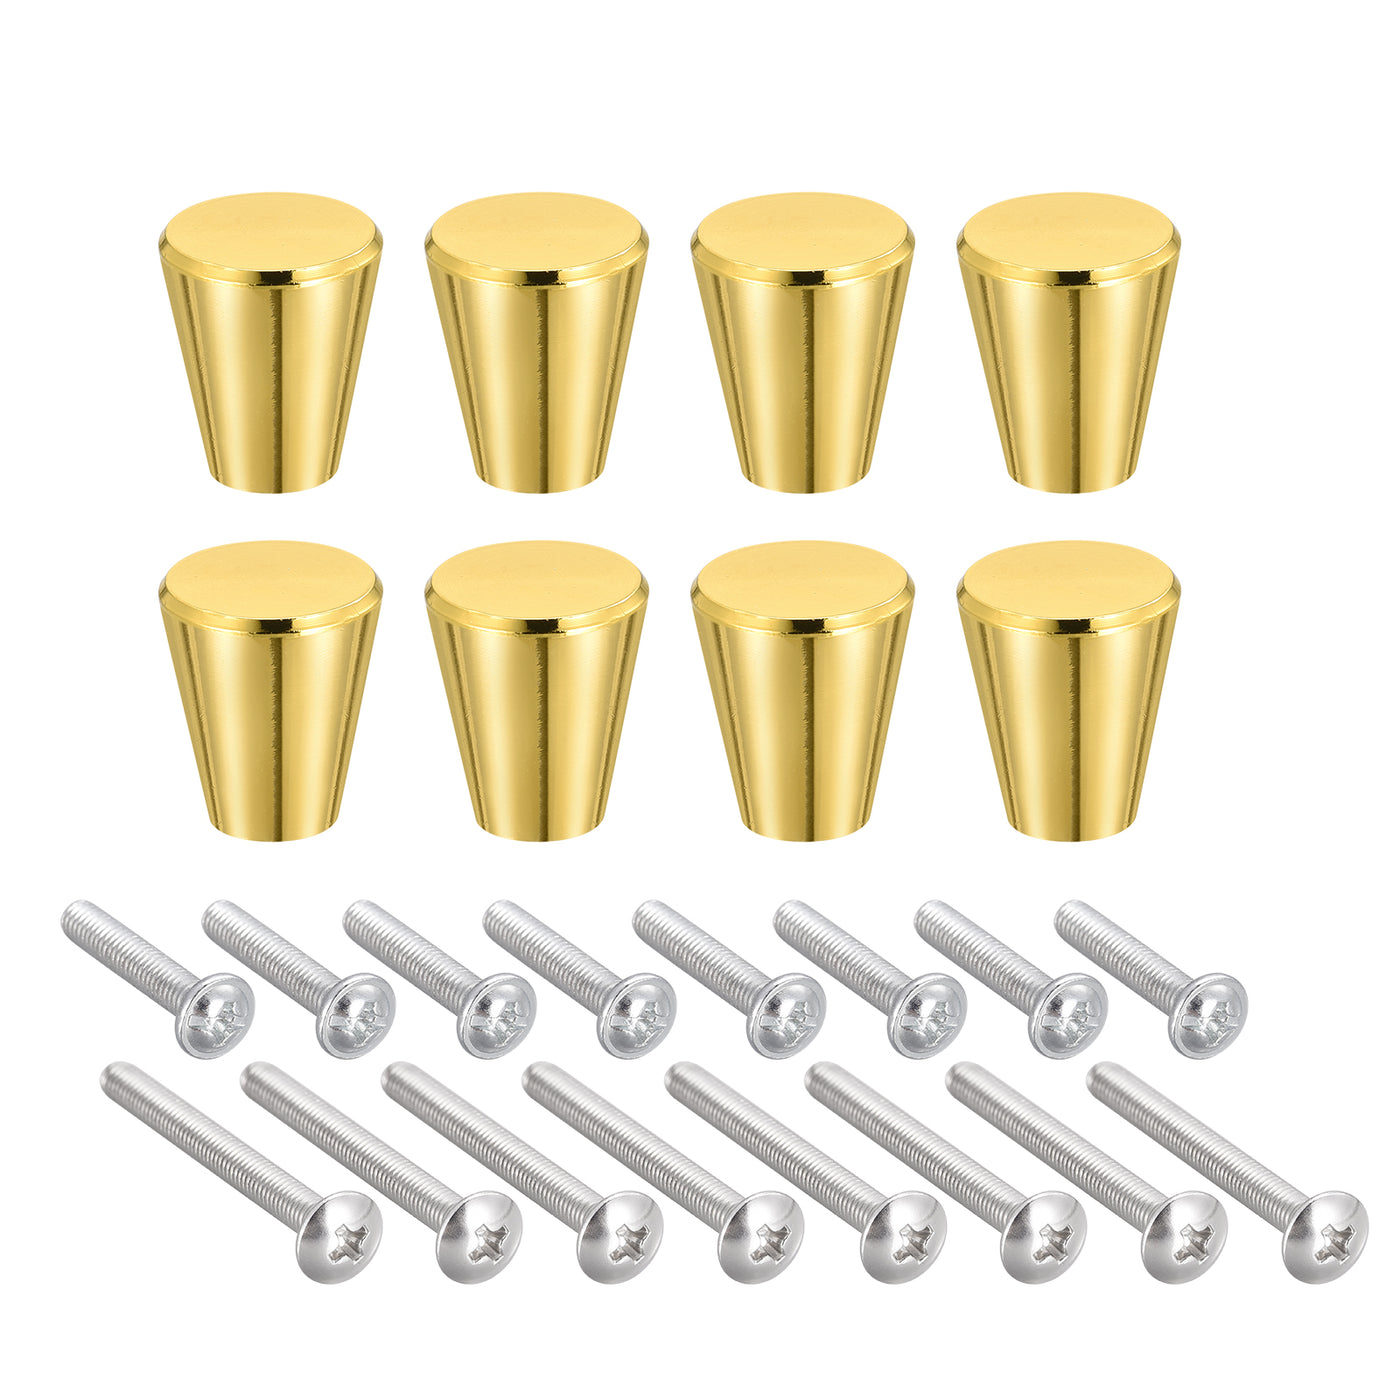 uxcell Uxcell 20x23mm Drawer Knobs, 8pcs Aluminum Alloy Wardrobe Pull Handles Champagne Gold